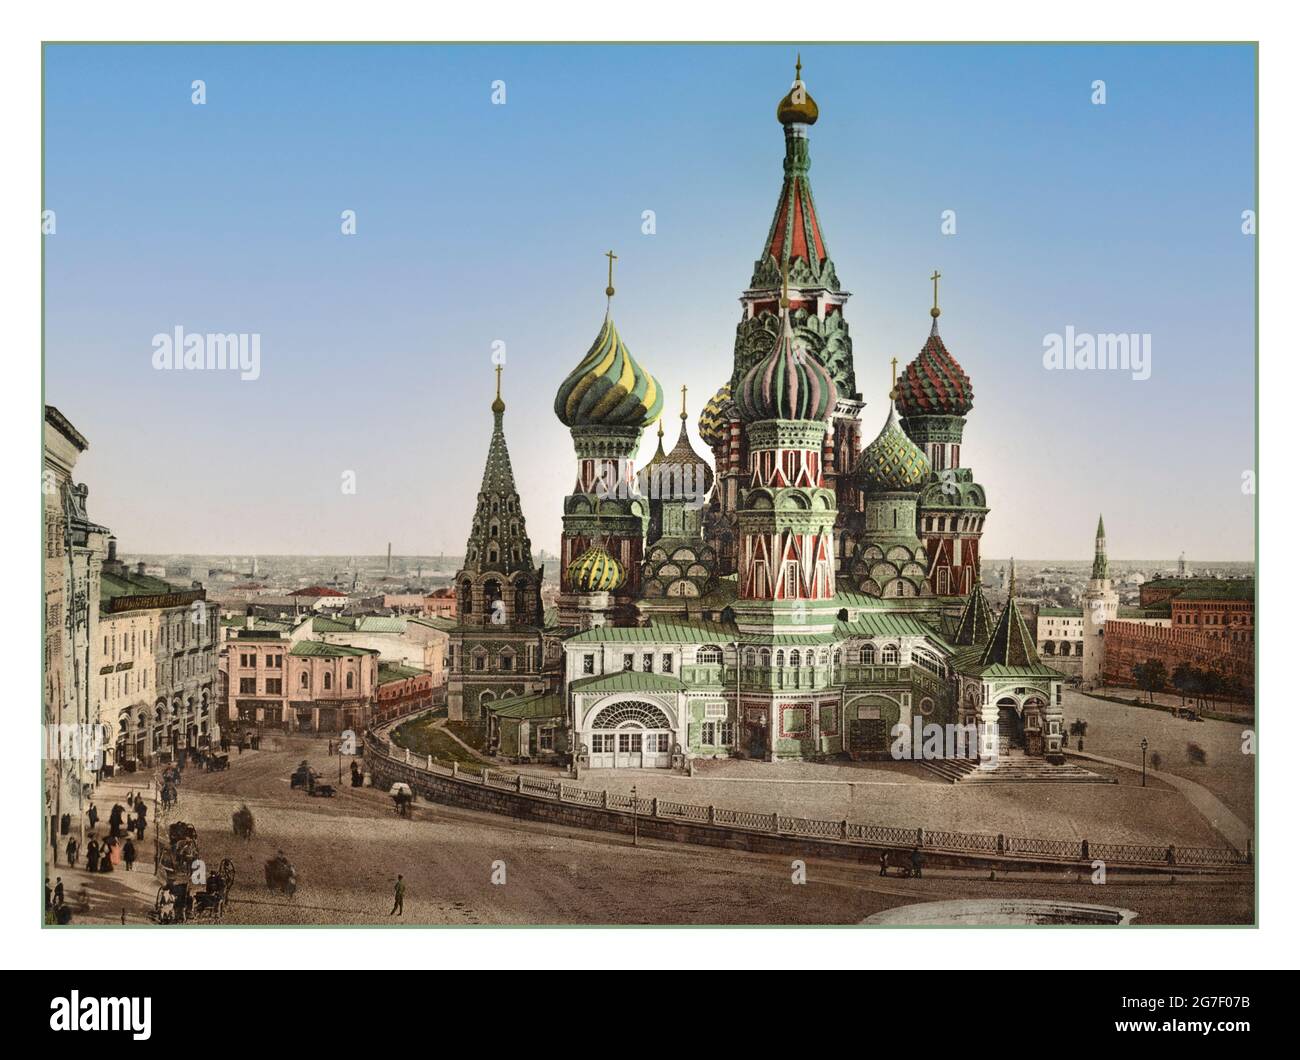 [St. Basil Basil’s Cathedral, Moscow, Russia] Red Square Center Cathedral of Vasily The Blessed Orthodox Church taken between 1890 and 1900] : Photochrom Archive Historic Russia Moscow (also called Pokrovsky Cathedral) Mehrfarbige Kuppeln aus dem 16. Jahrhundert Stockfoto